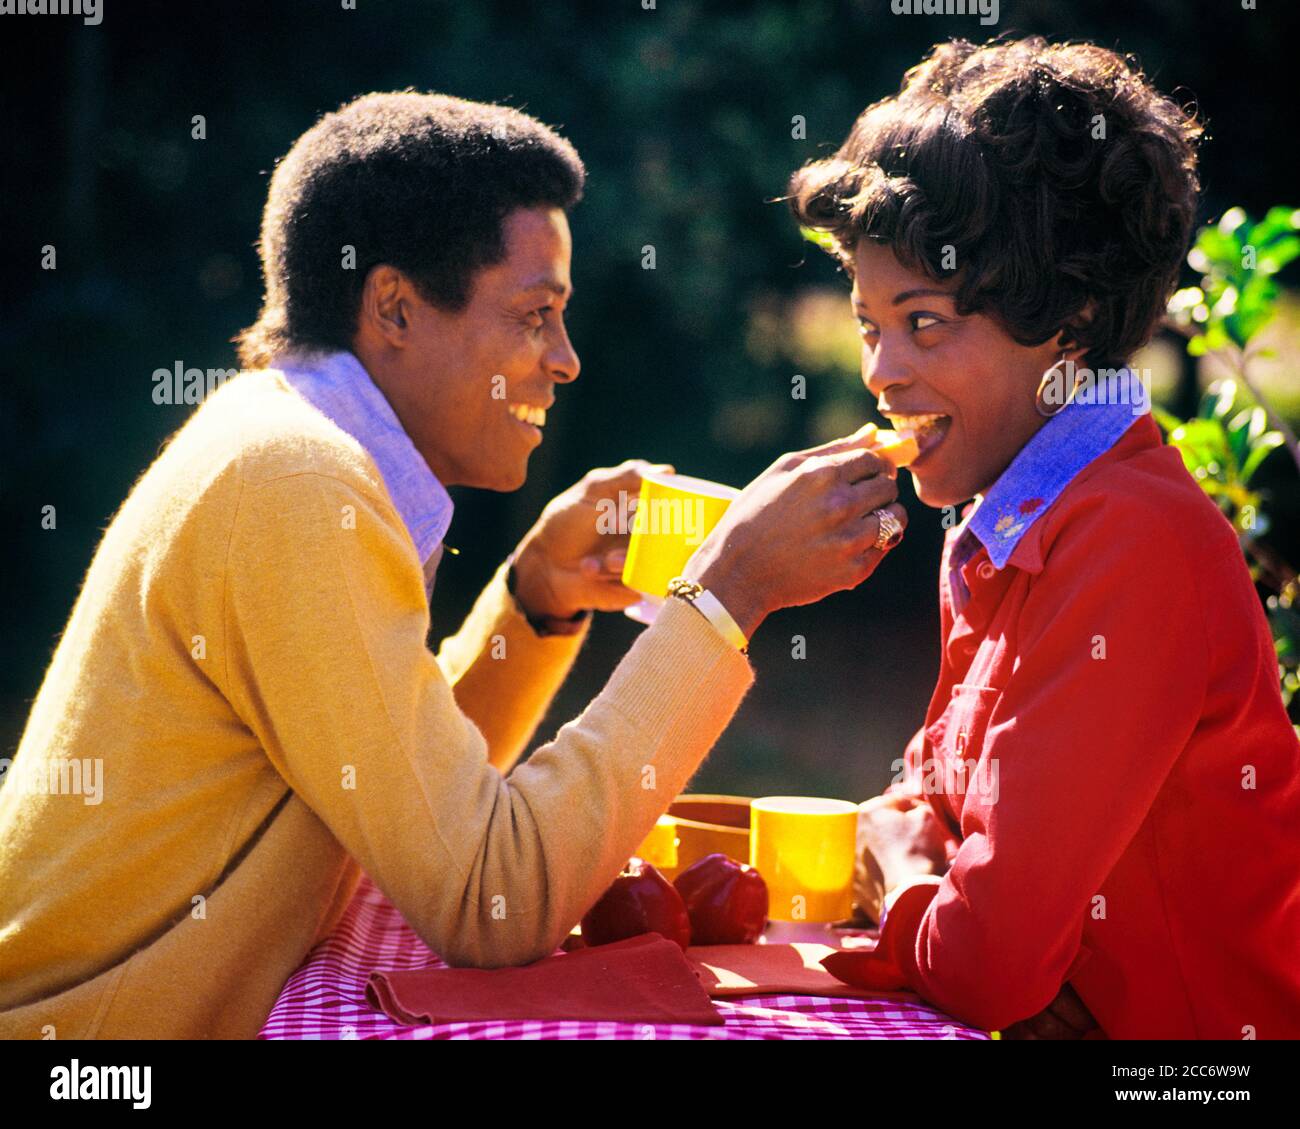 1980s SMILING AFRICAN-AMERICAN COUPLE HUSBAND AND WIFE EATING SHARING BREAKFAST MEAL FOOD TOGETHER OUTDOORS IN BRIGHT SUNLIGHT - cd00287 CAM001 HARS 1 COMMUNICATION YOUNG ADULT BALANCE STRONG PLEASED JOY LIFESTYLE FEMALES MARRIED SPOUSE HUSBANDS HEALTHINESS HOME LIFE COPY SPACE HALF-LENGTH LADIES PERSONS CARING MALES PARTNER TEMPTATION HAPPINESS BRIGHT WELLNESS CHEERFUL AFRICAN-AMERICANS AFRICAN-AMERICAN AND CAM001 BLACK ETHNICITY IN SMILES CONNECTION CONCEPTUAL JOYFUL STYLISH PERSONAL ATTACHMENT AFFECTION EMOTION WIVES YOUNG ADULT MAN YOUNG ADULT WOMAN OLD FASHIONED AFRICAN AMERICANS Stock Photo